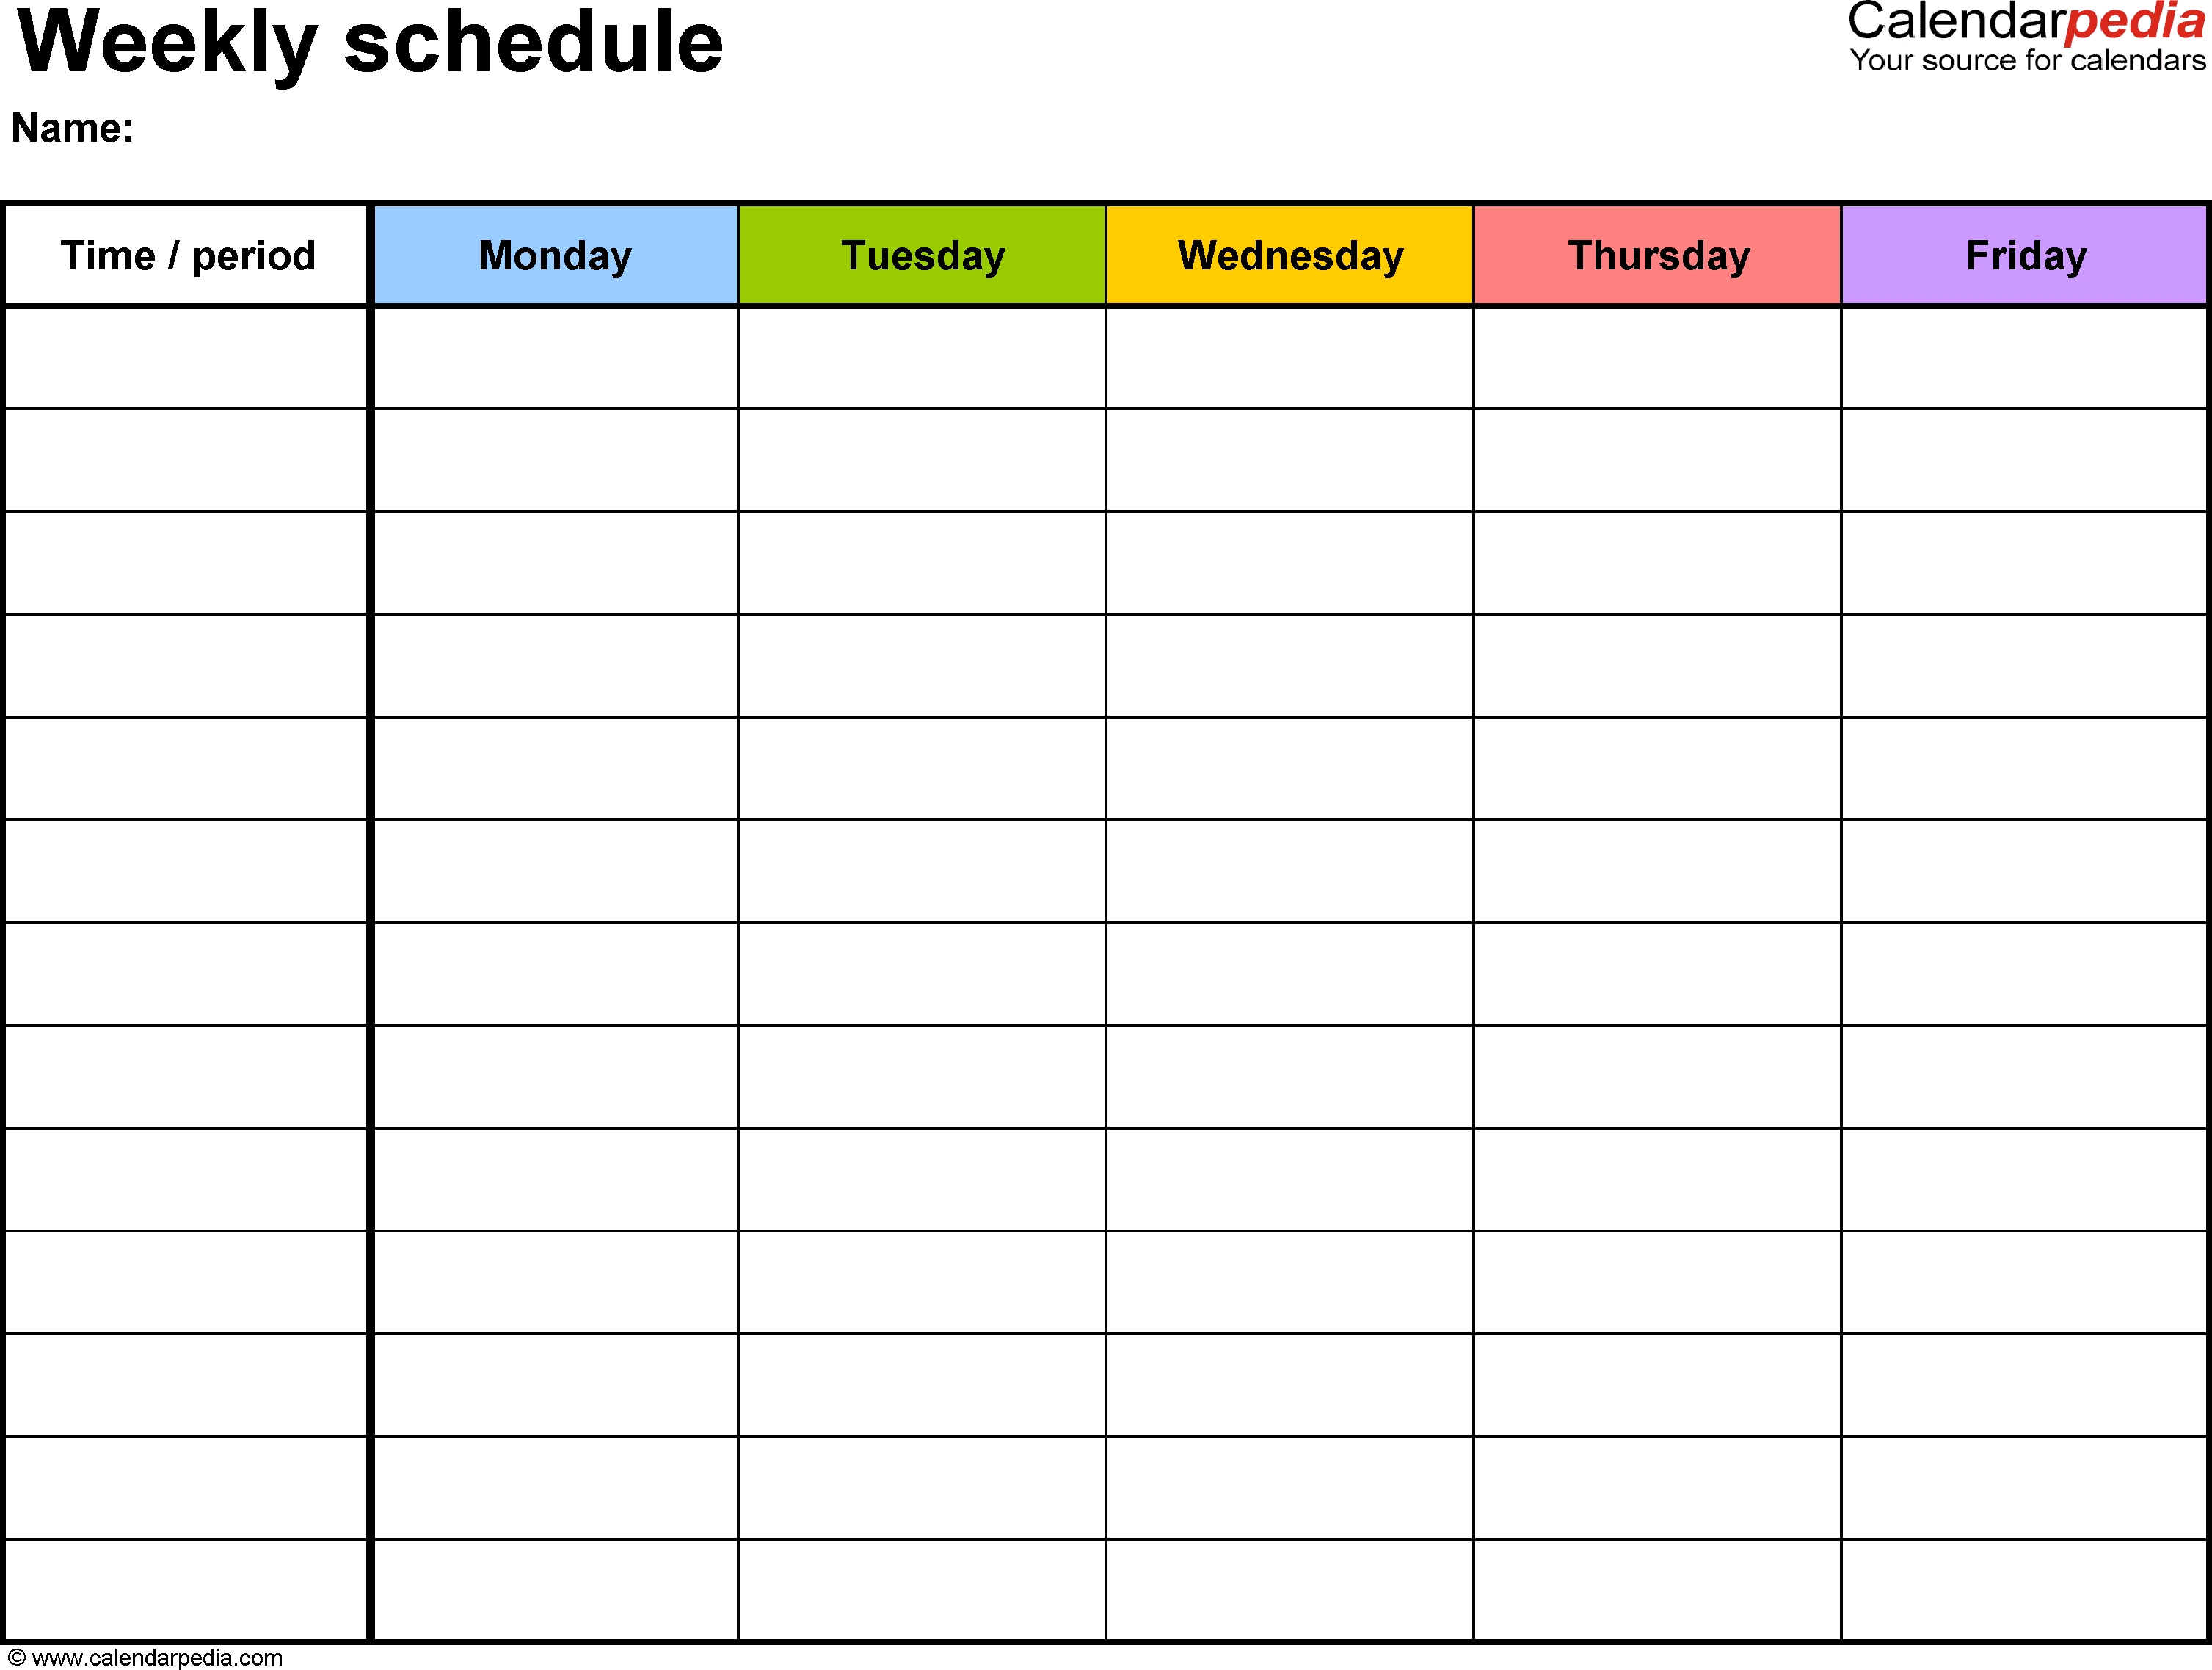 Weekly Schedule Template For Word Version 1: Landscape, 1 Extraordinary Monday To Friday Calendar Template